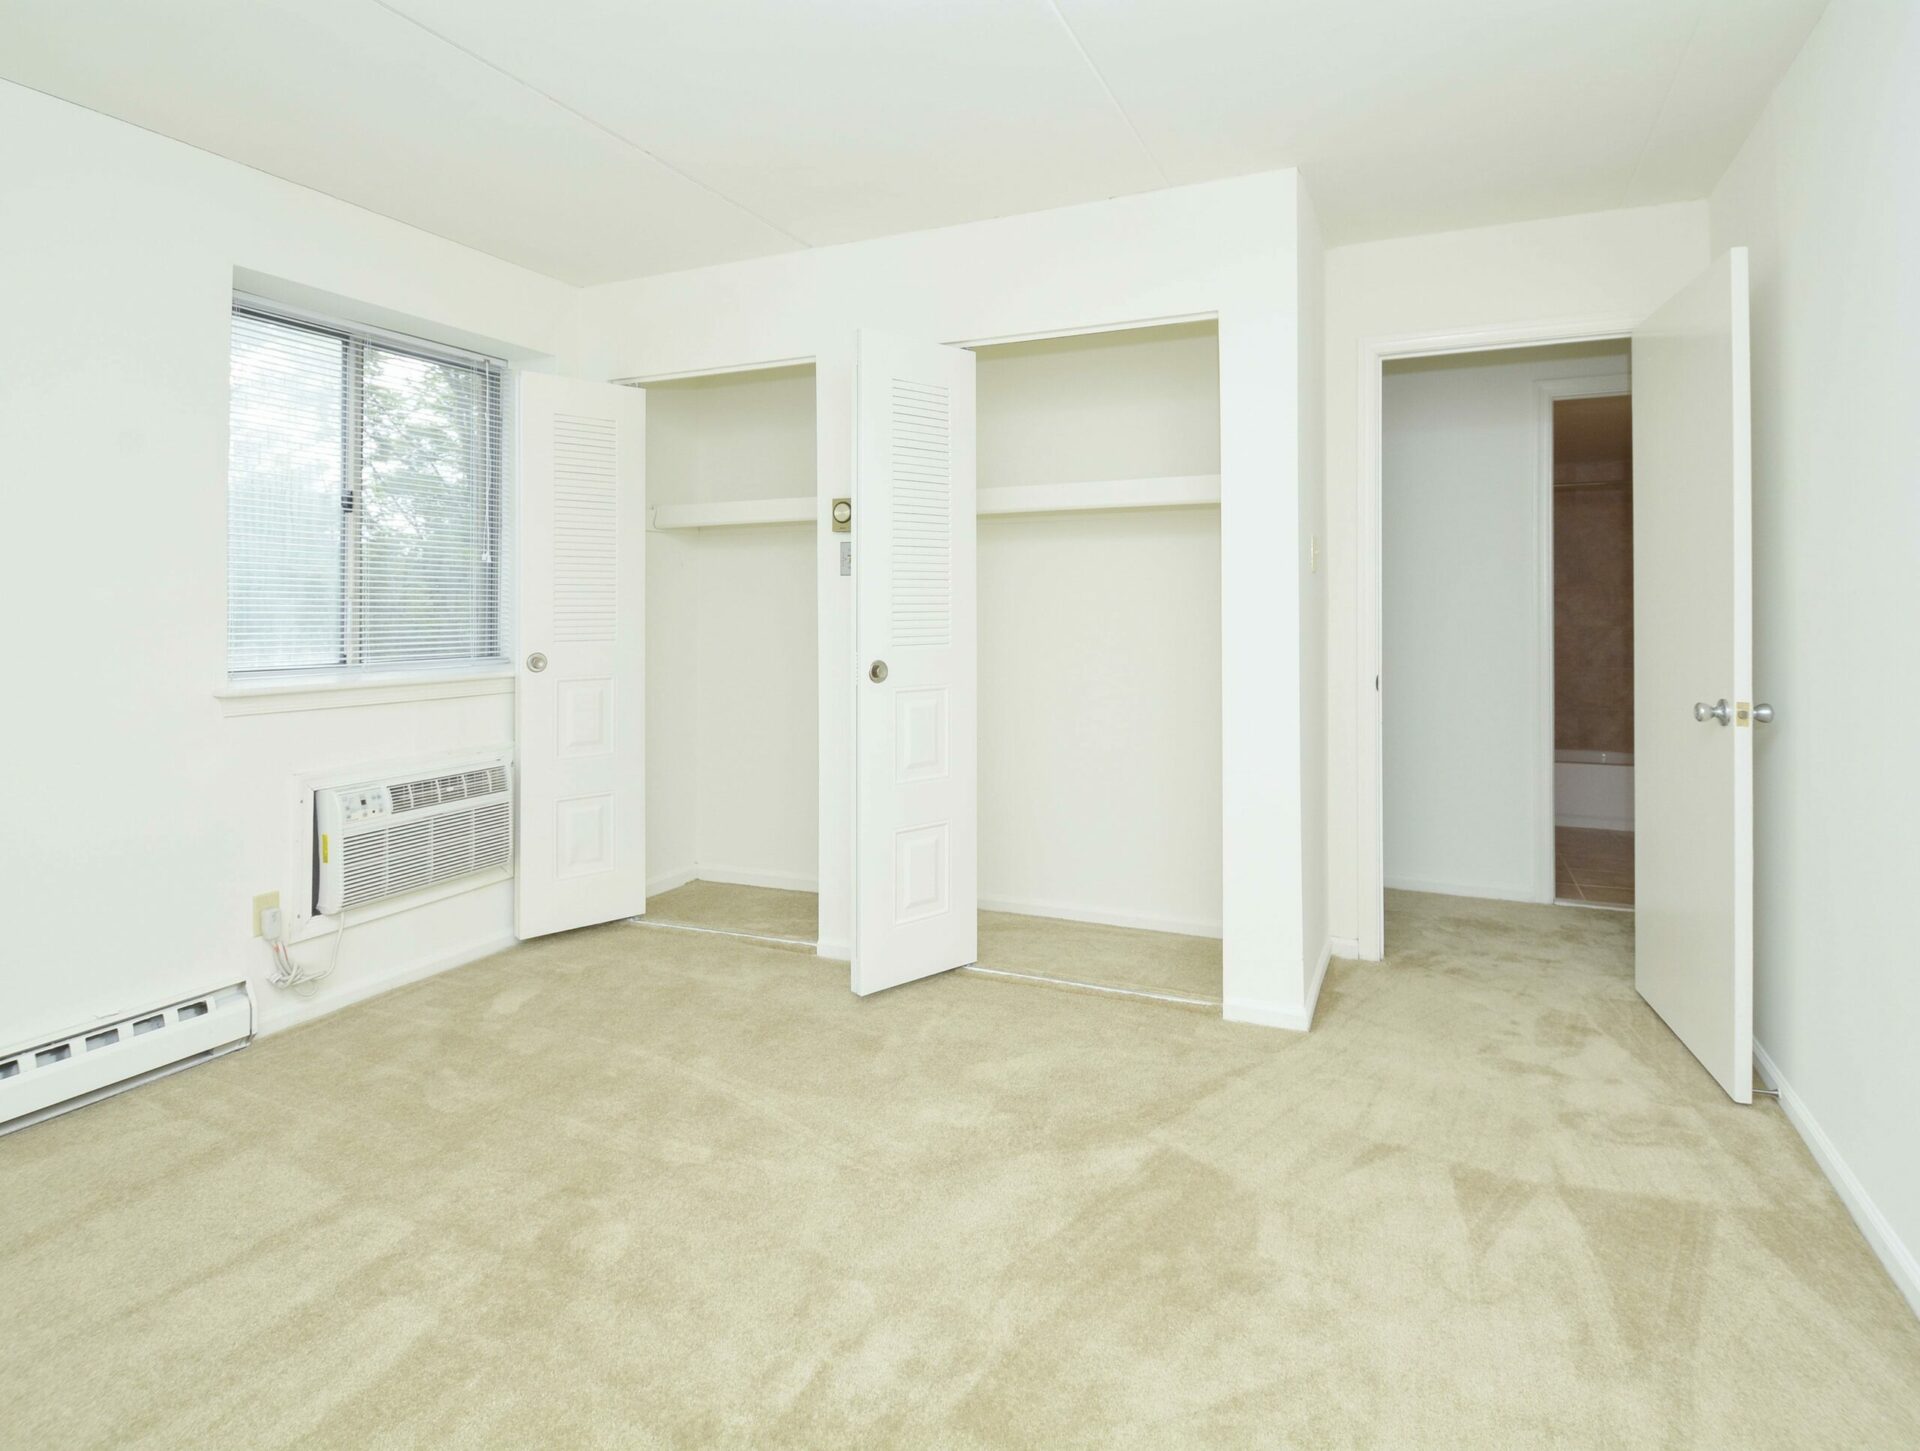 Carpeting, a window and two closets in a bedroom at Valley Forge Suites